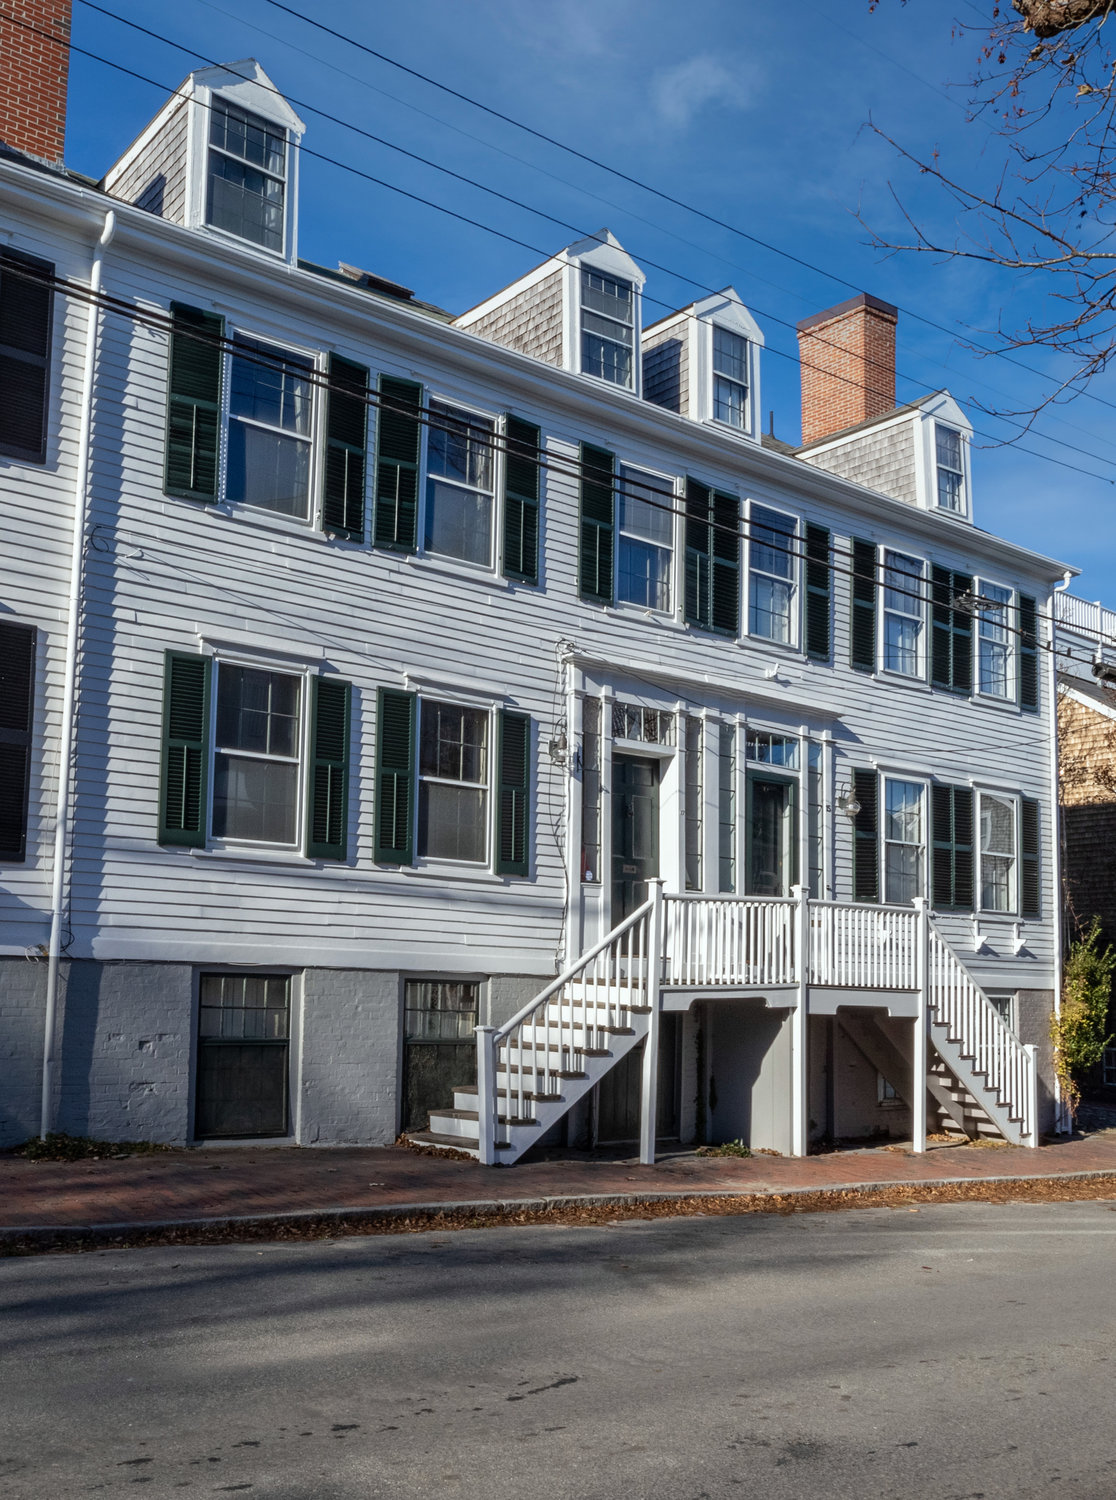 Located just one block from historic cobblestoned Main Street, this antique six-bedroom, two-bathroom home is one of the Folger Block row houses built in 1831.